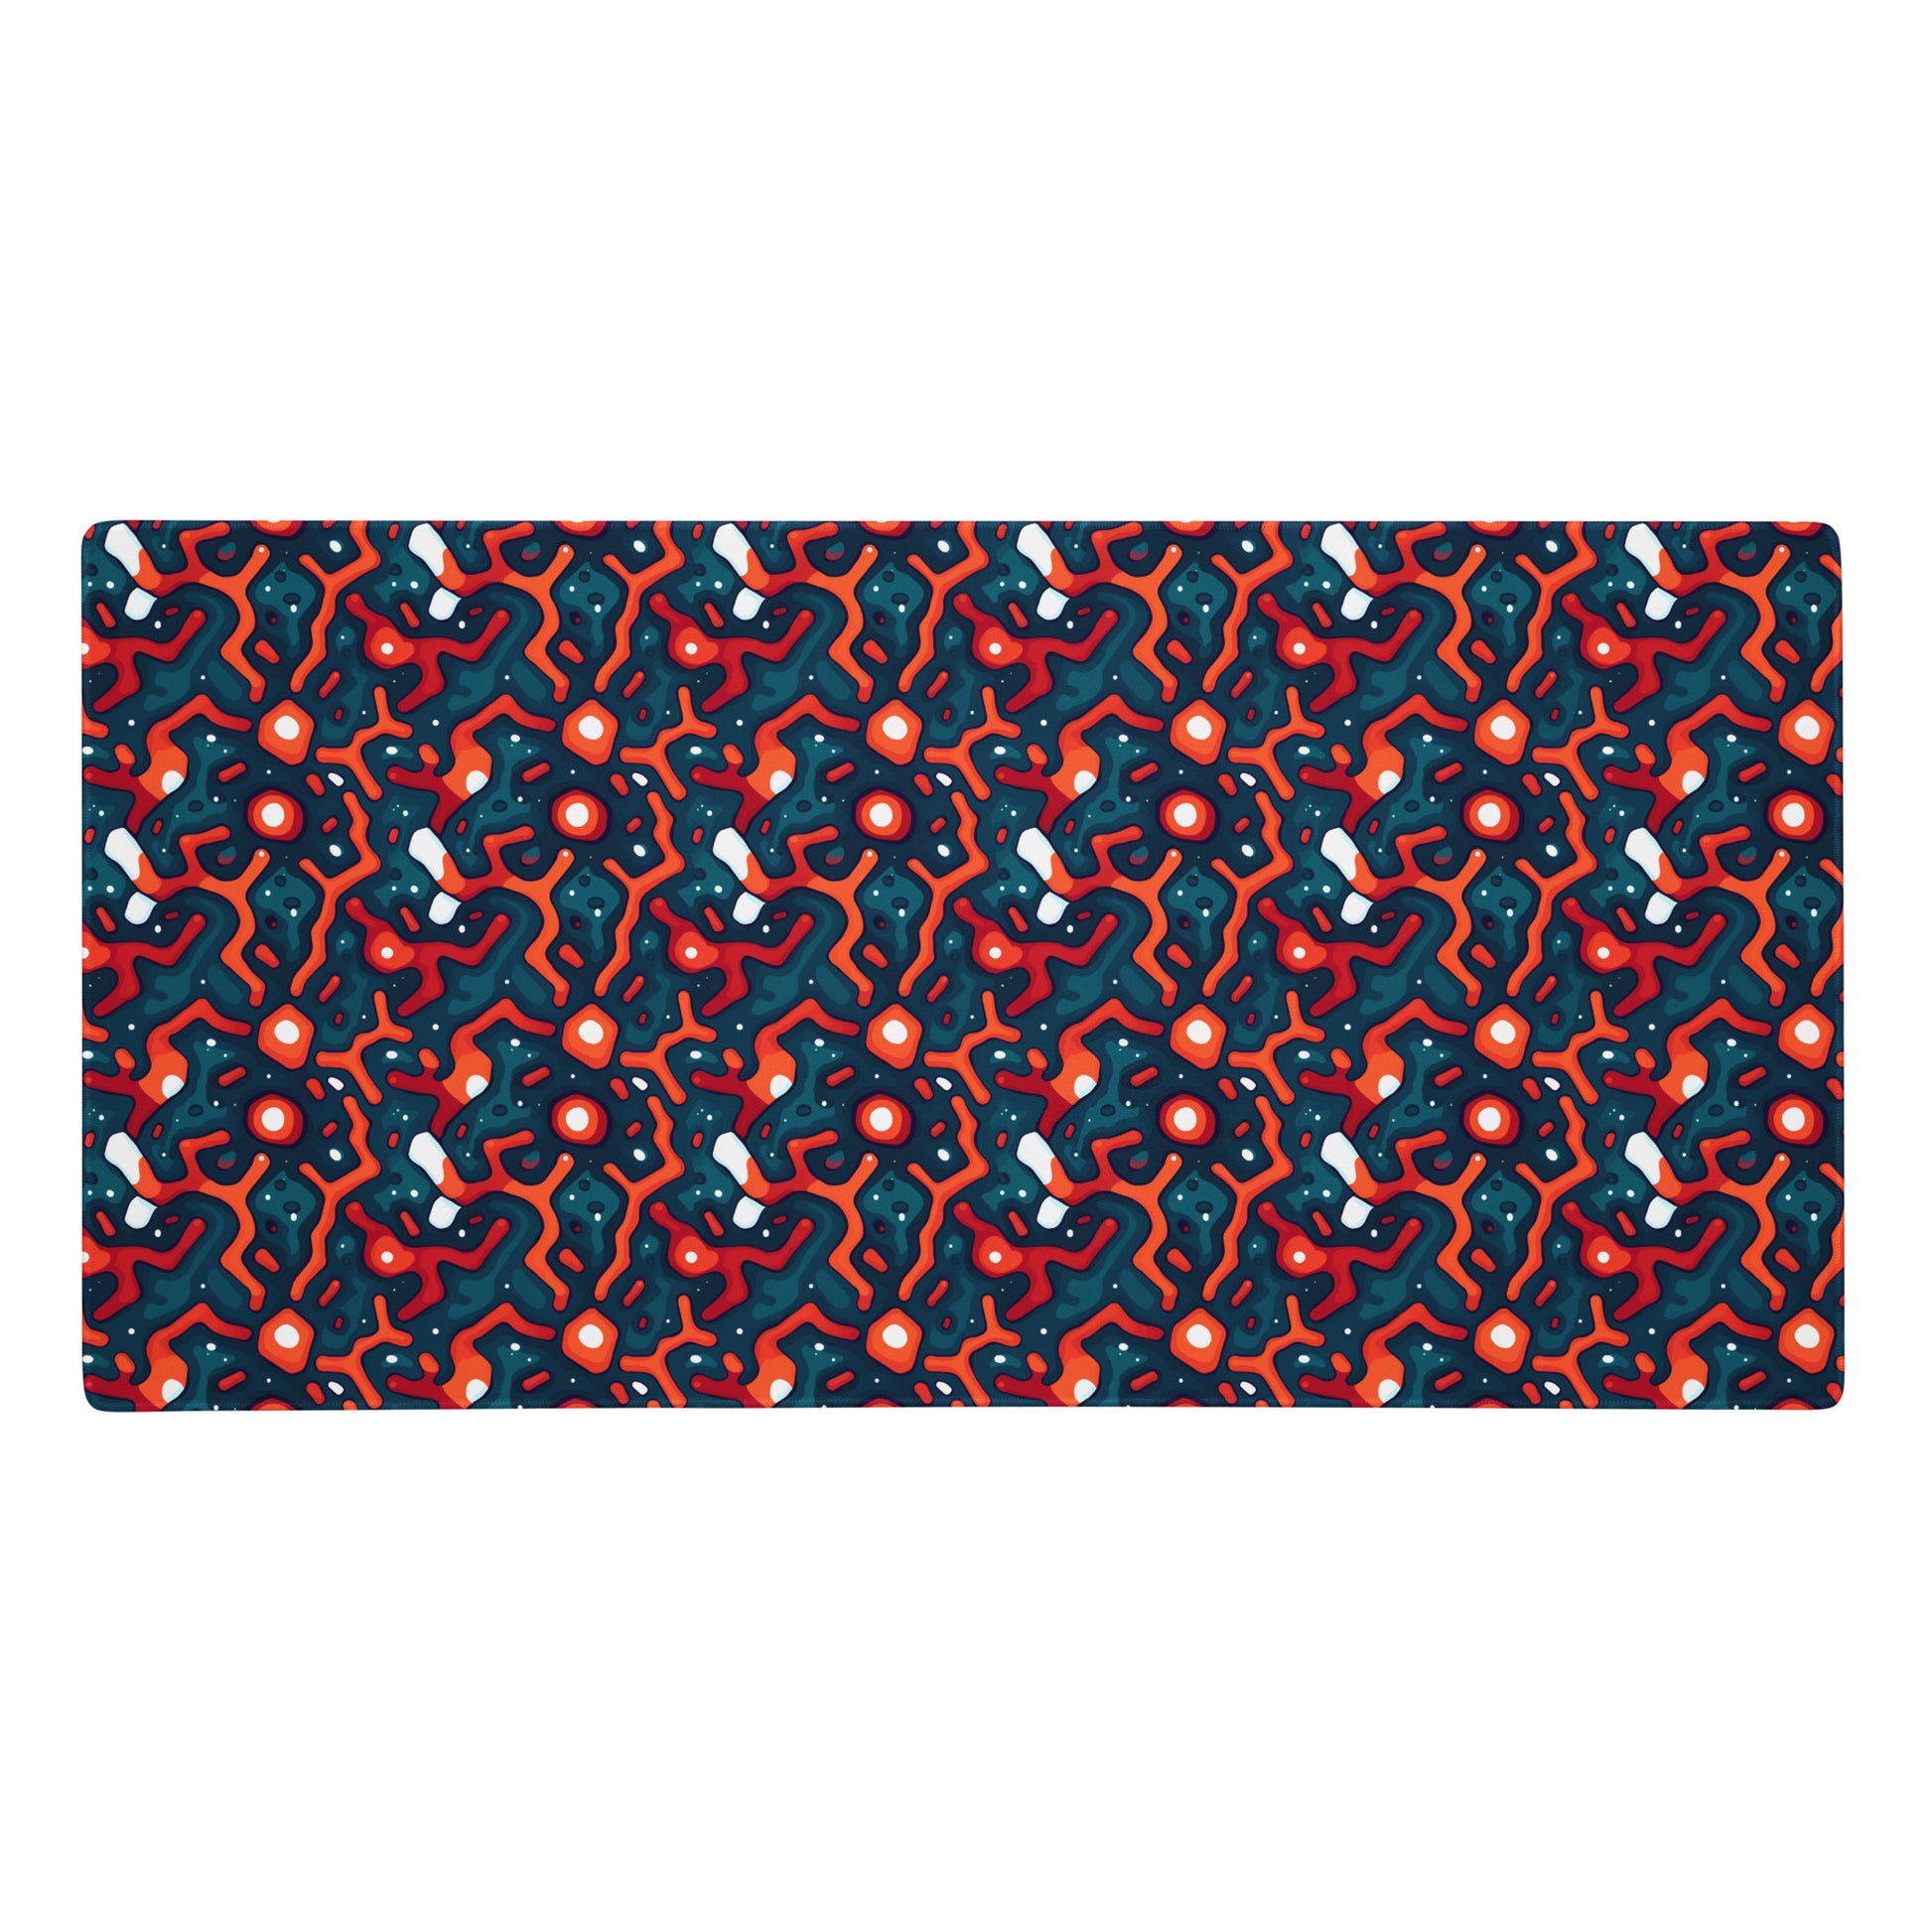 A 36" x 18" desk pad with a blue and orange crack pattern.